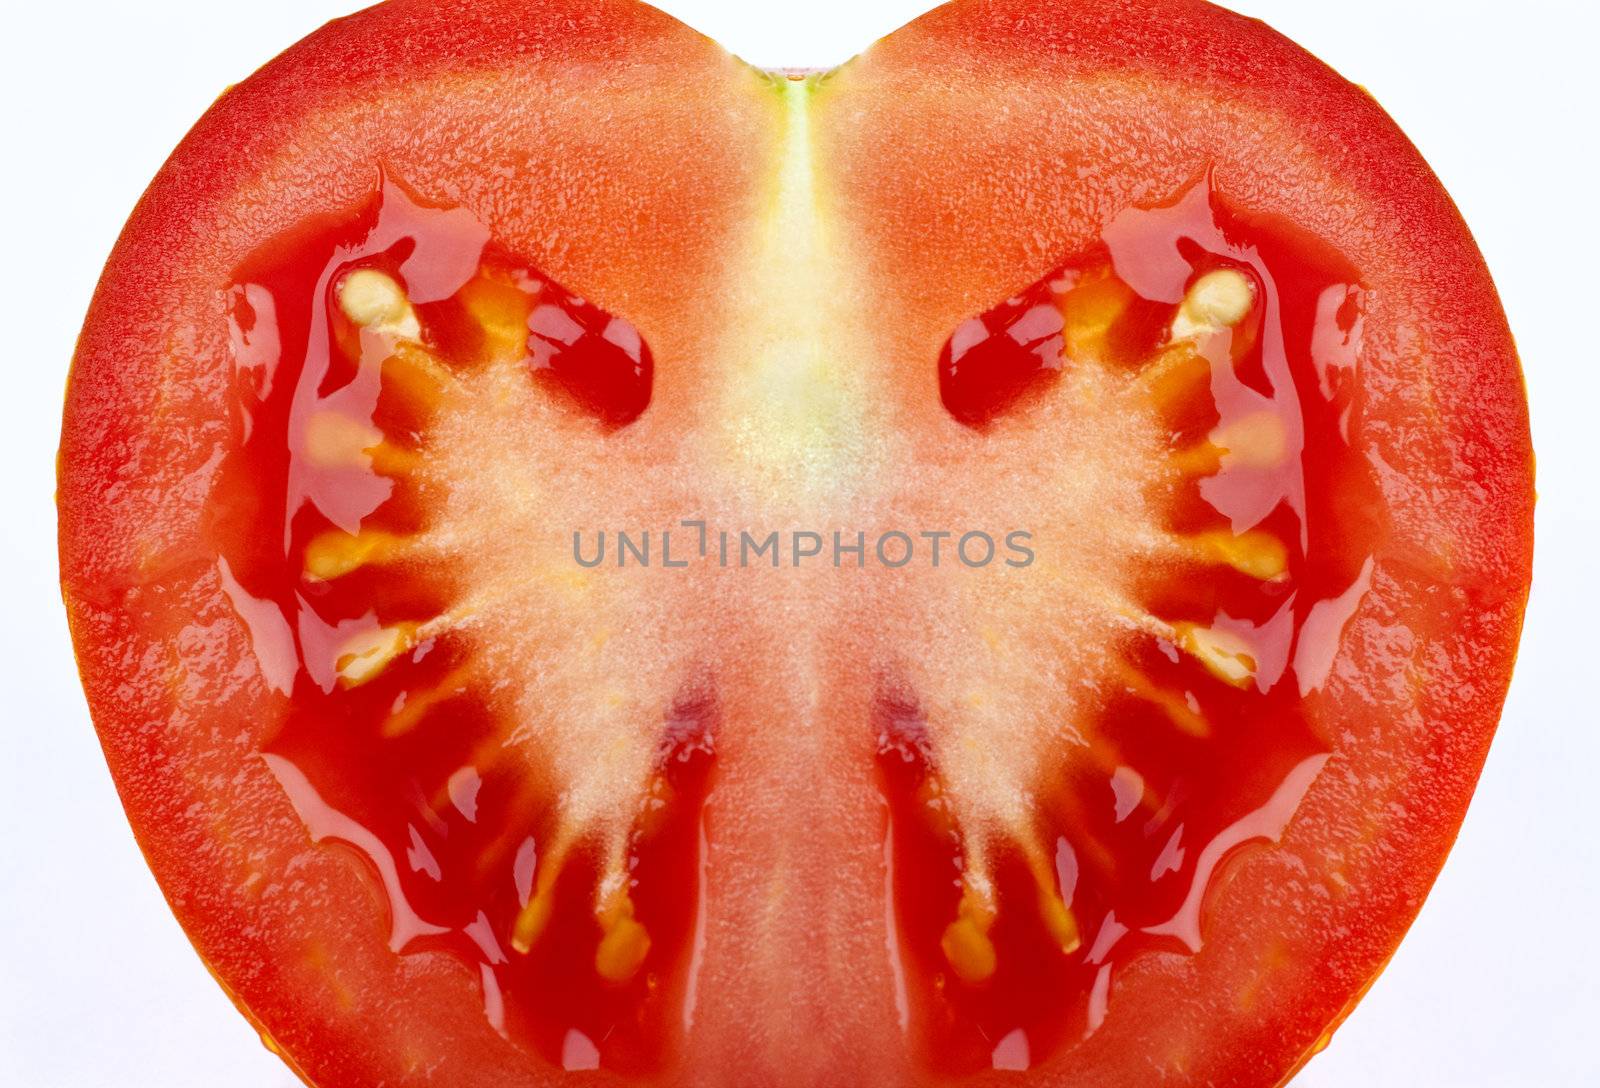 A detailed close-up of a Tomato slice.